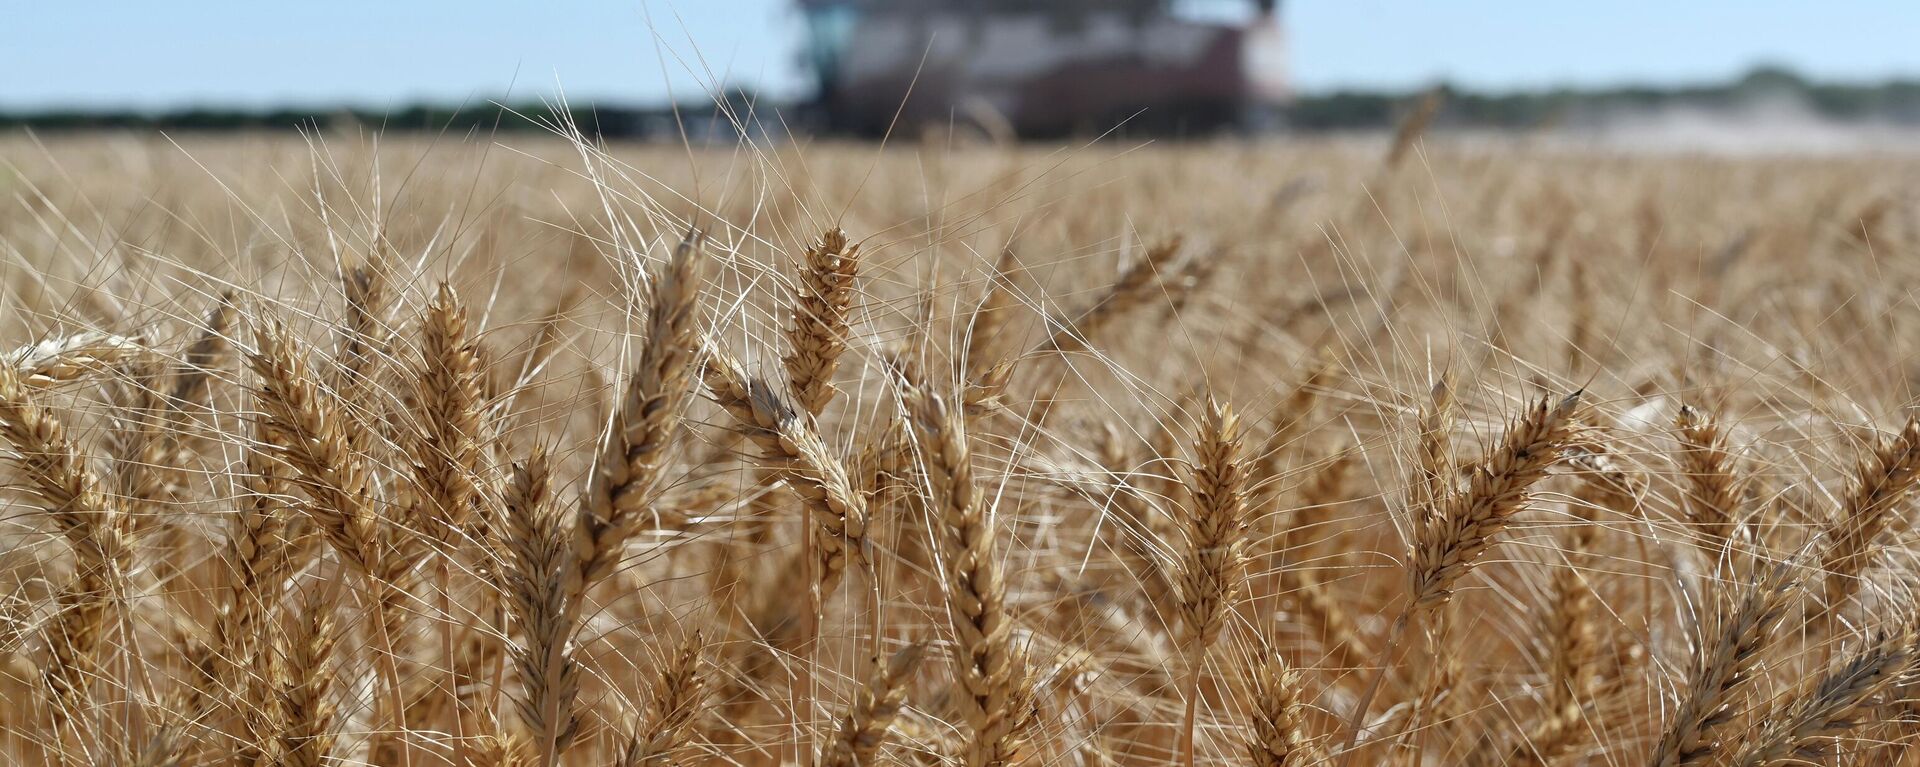 A harvester collects wheat in Semikarakorsky District of Rostov-on-Don region near Semikarakorsk, Southern Russia, Wednesday, July 6, 2022. Russia is the world's biggest exporter of wheat, accounting for almost a fifth of global shipments. It is expected to have one of its best ever crop seasons this year. Agriculture is among the most important industries in Russia, accounting for around 4% of its GDP, according to the World Bank. (AP Photo) - Sputnik Africa, 1920, 22.07.2023